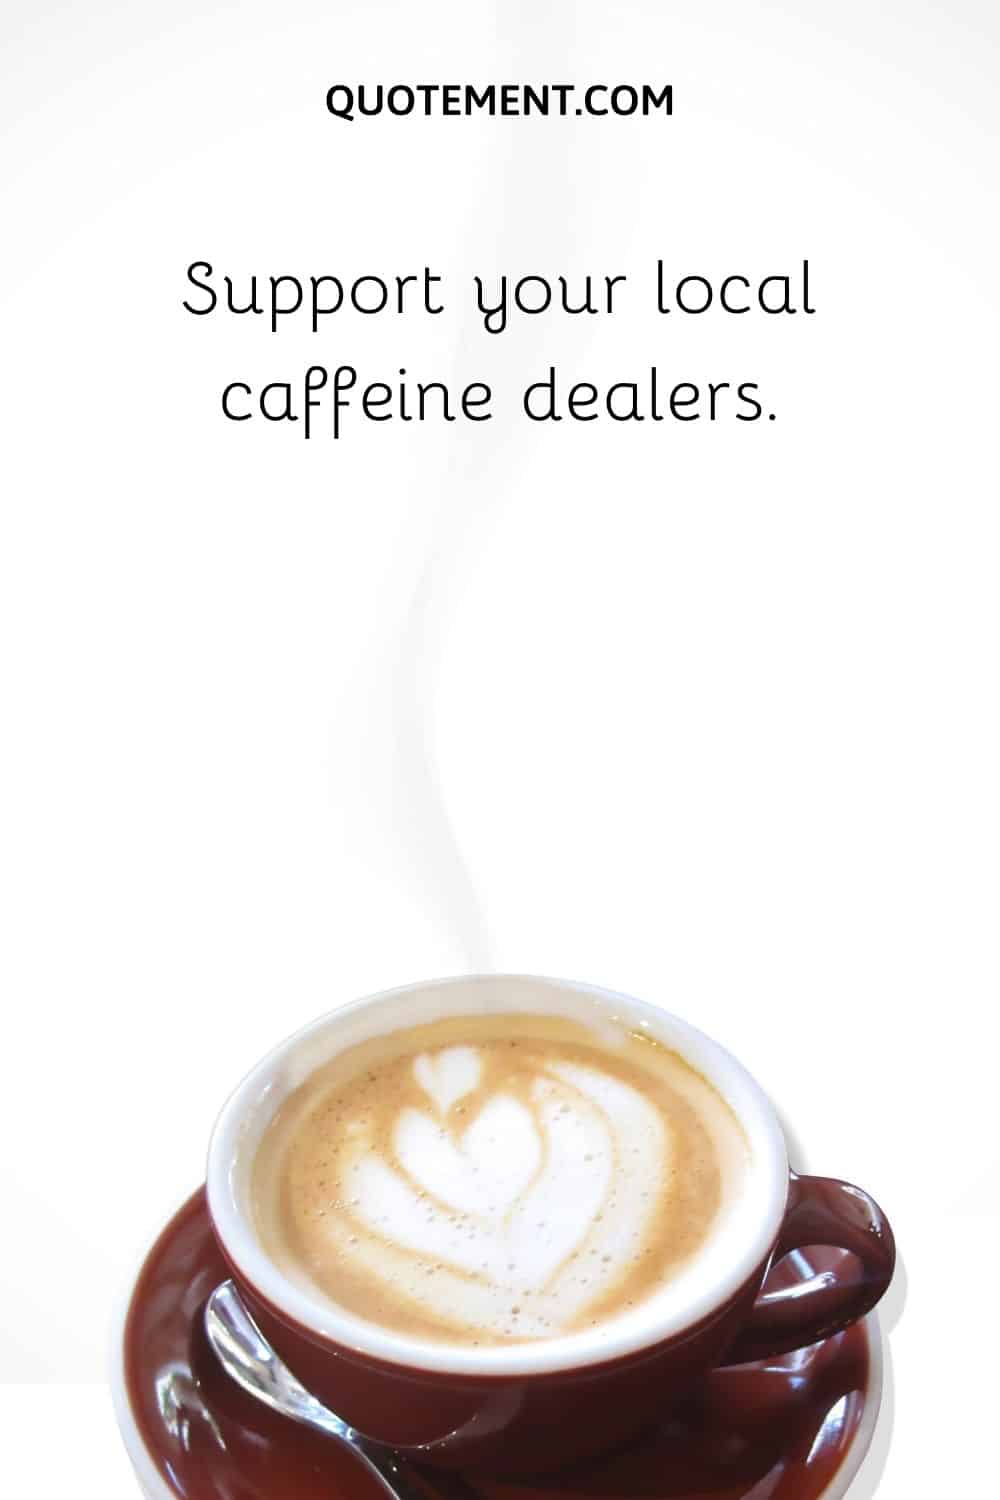 Support your local caffeine dealers